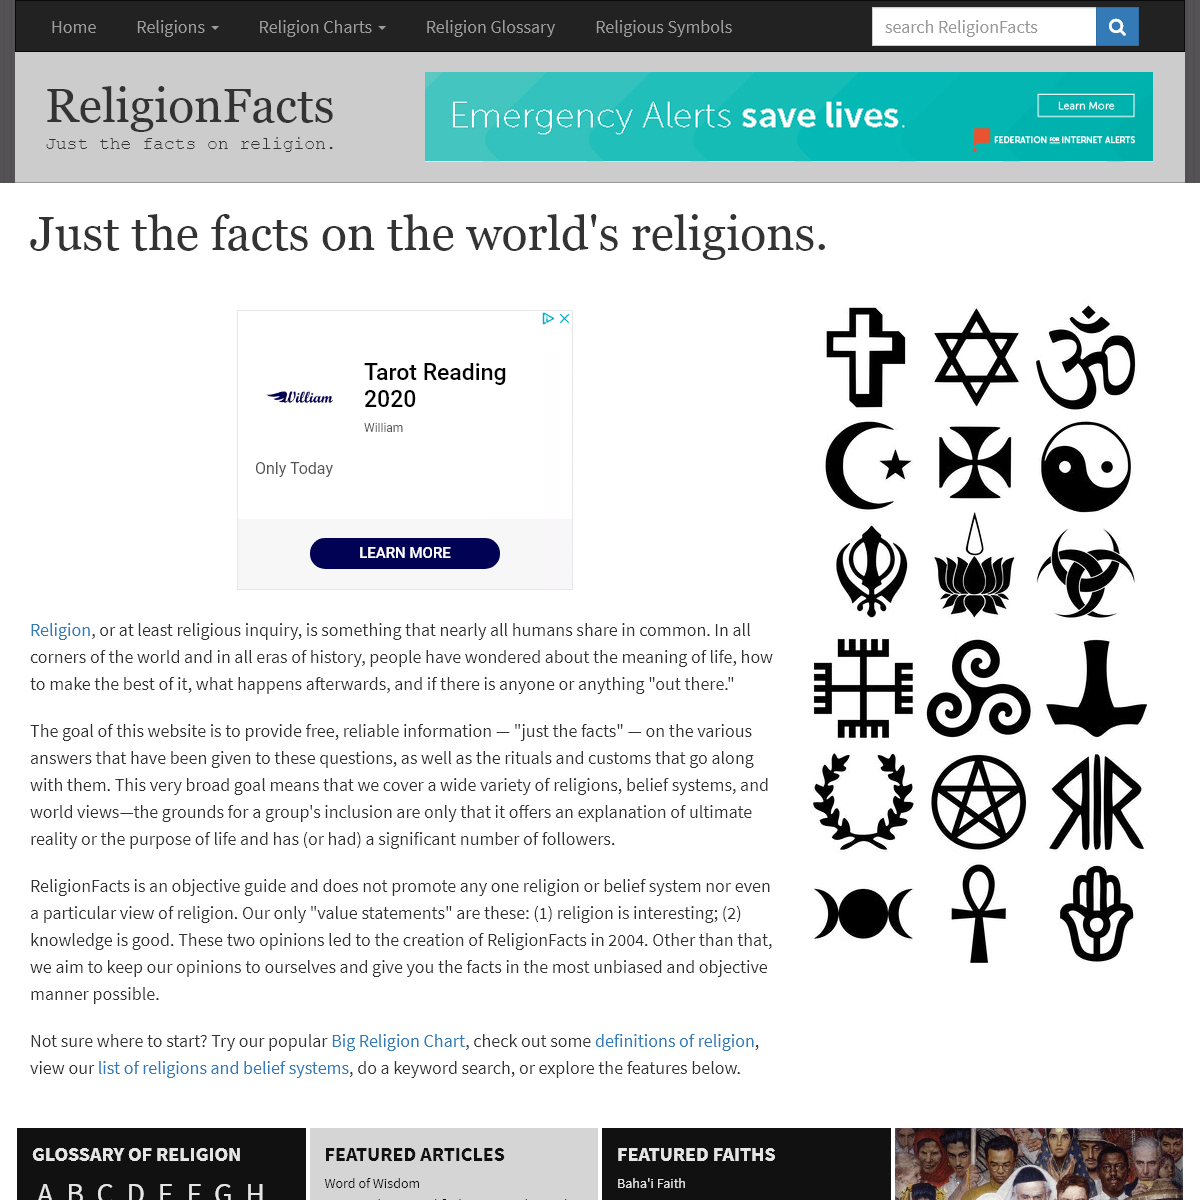 A complete backup of religionfacts.com